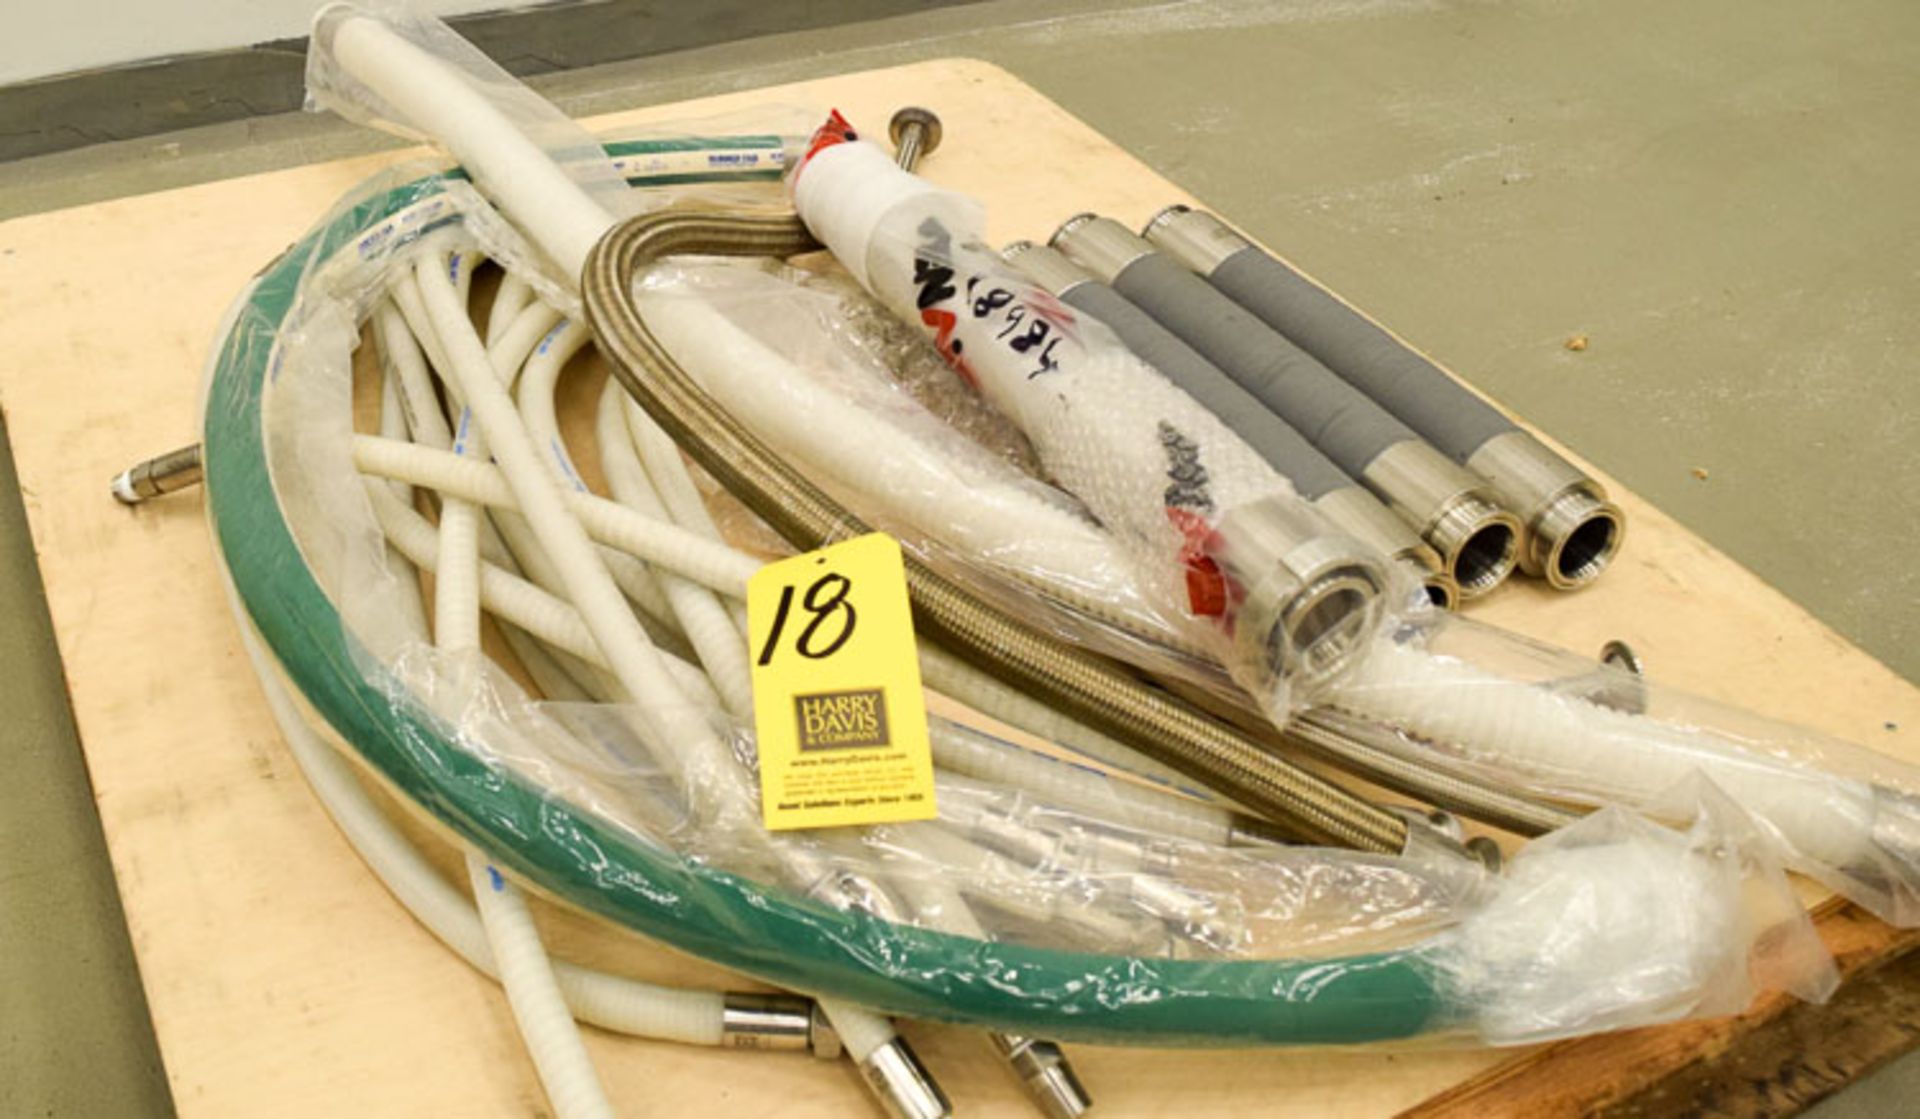 Assorted Suction, Discharge and Product Transfer Hoses - Rigging Fee: $ 25